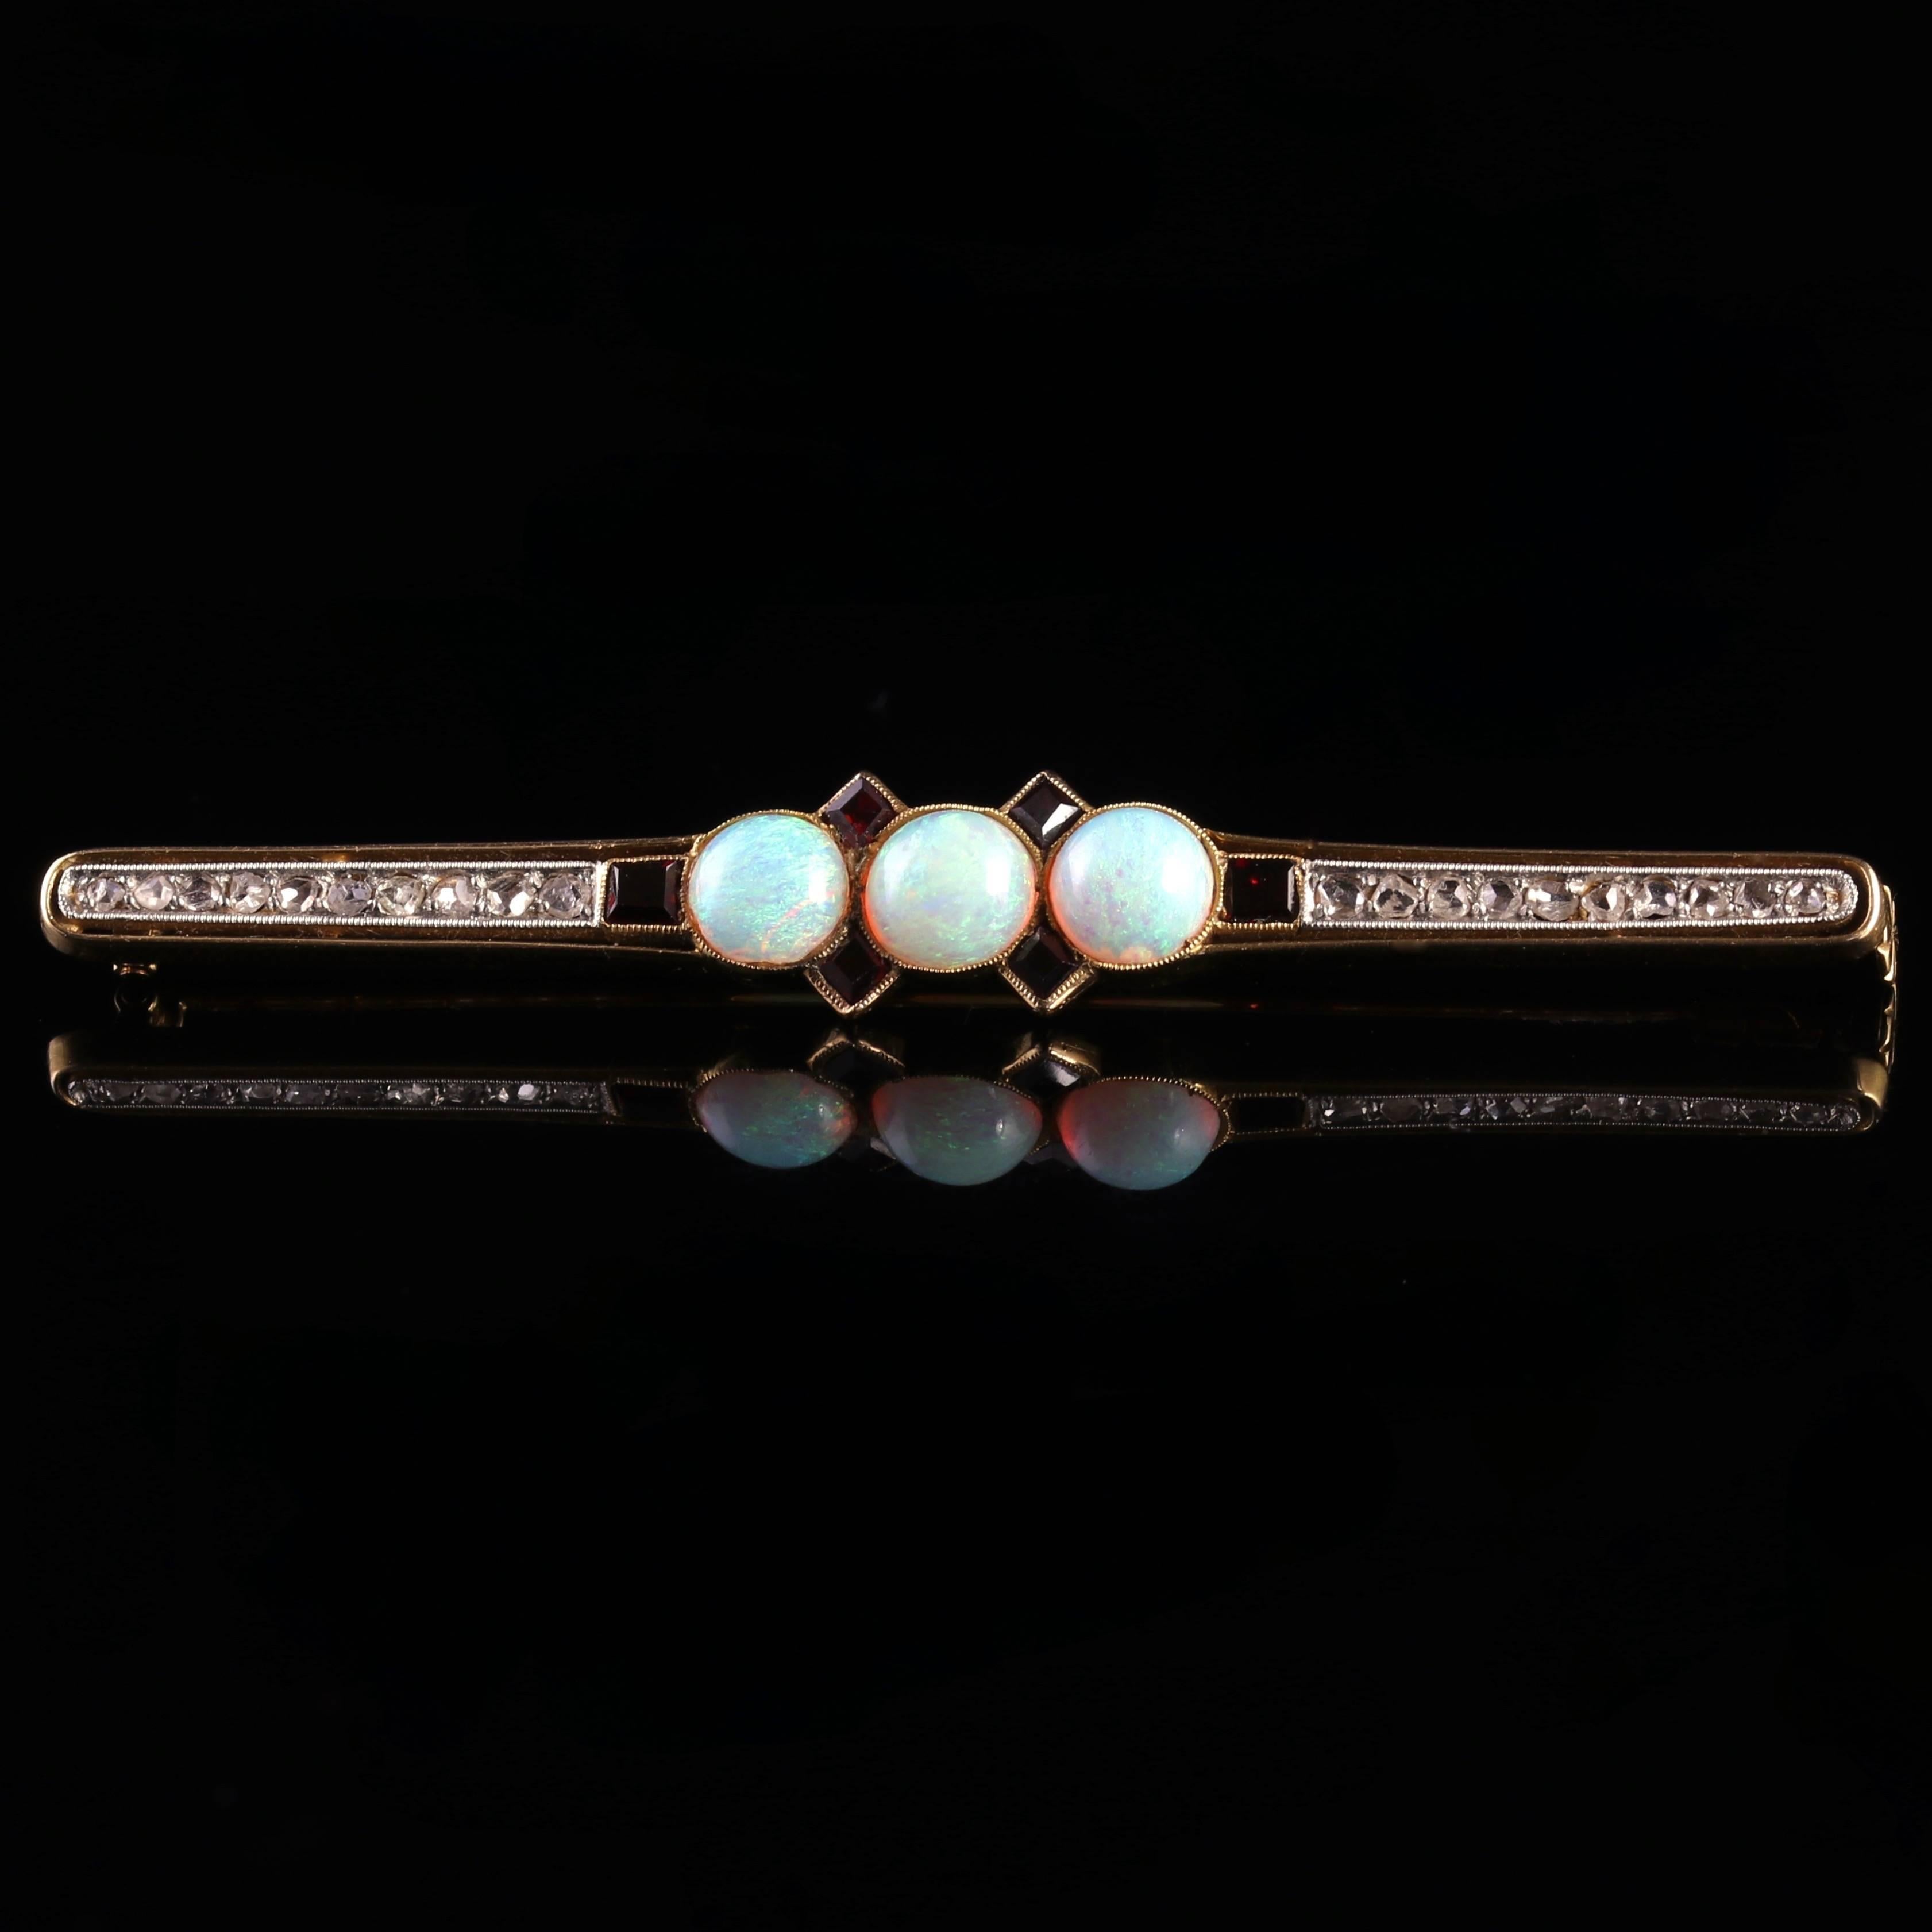 This spectacular 18ct Yellow Gold brooch is adorned with three natural Opals, Garnets and twenty rose cut Diamonds.

This lovely brooch is typical of the Art Deco period, the roaring 1920s.

The lovely natural Opal is a kaleidoscope of rainbow